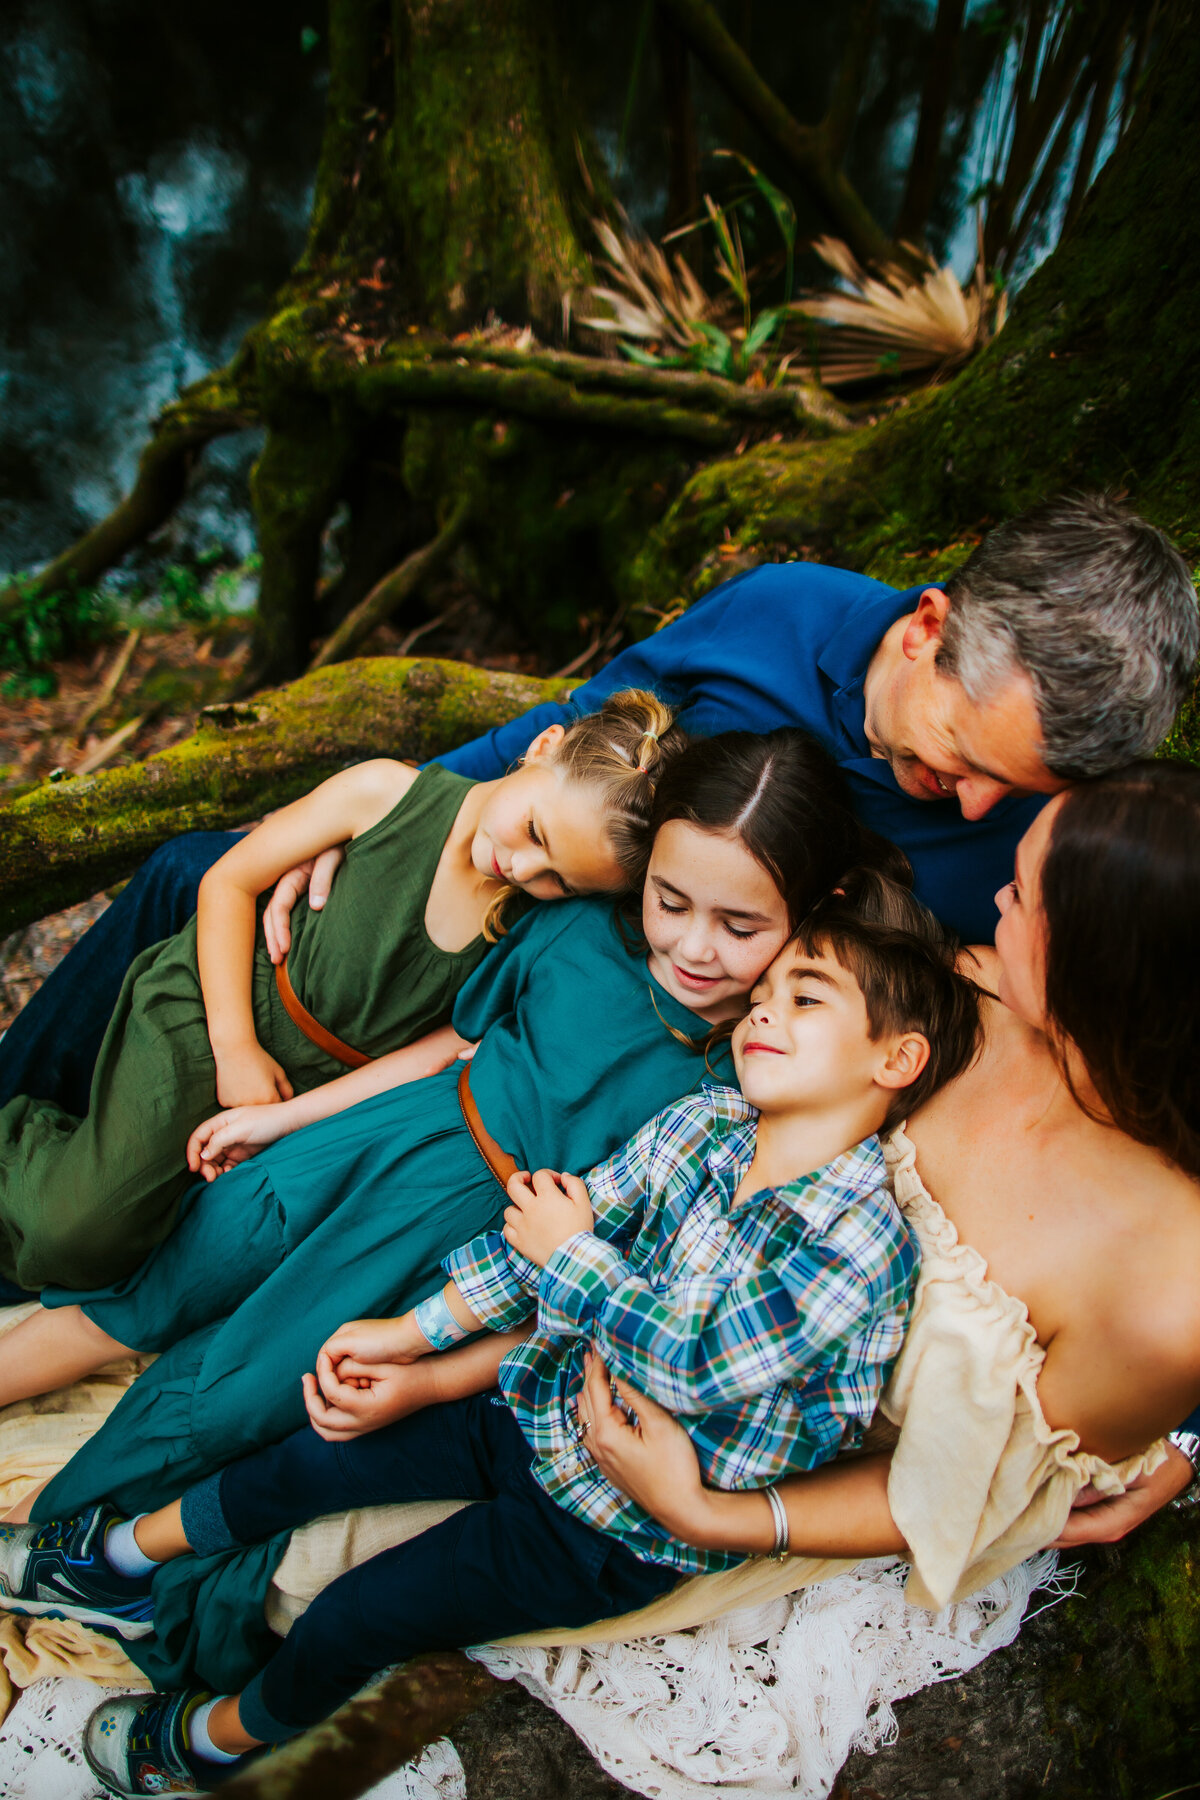 woodsy park family photo session in greenery